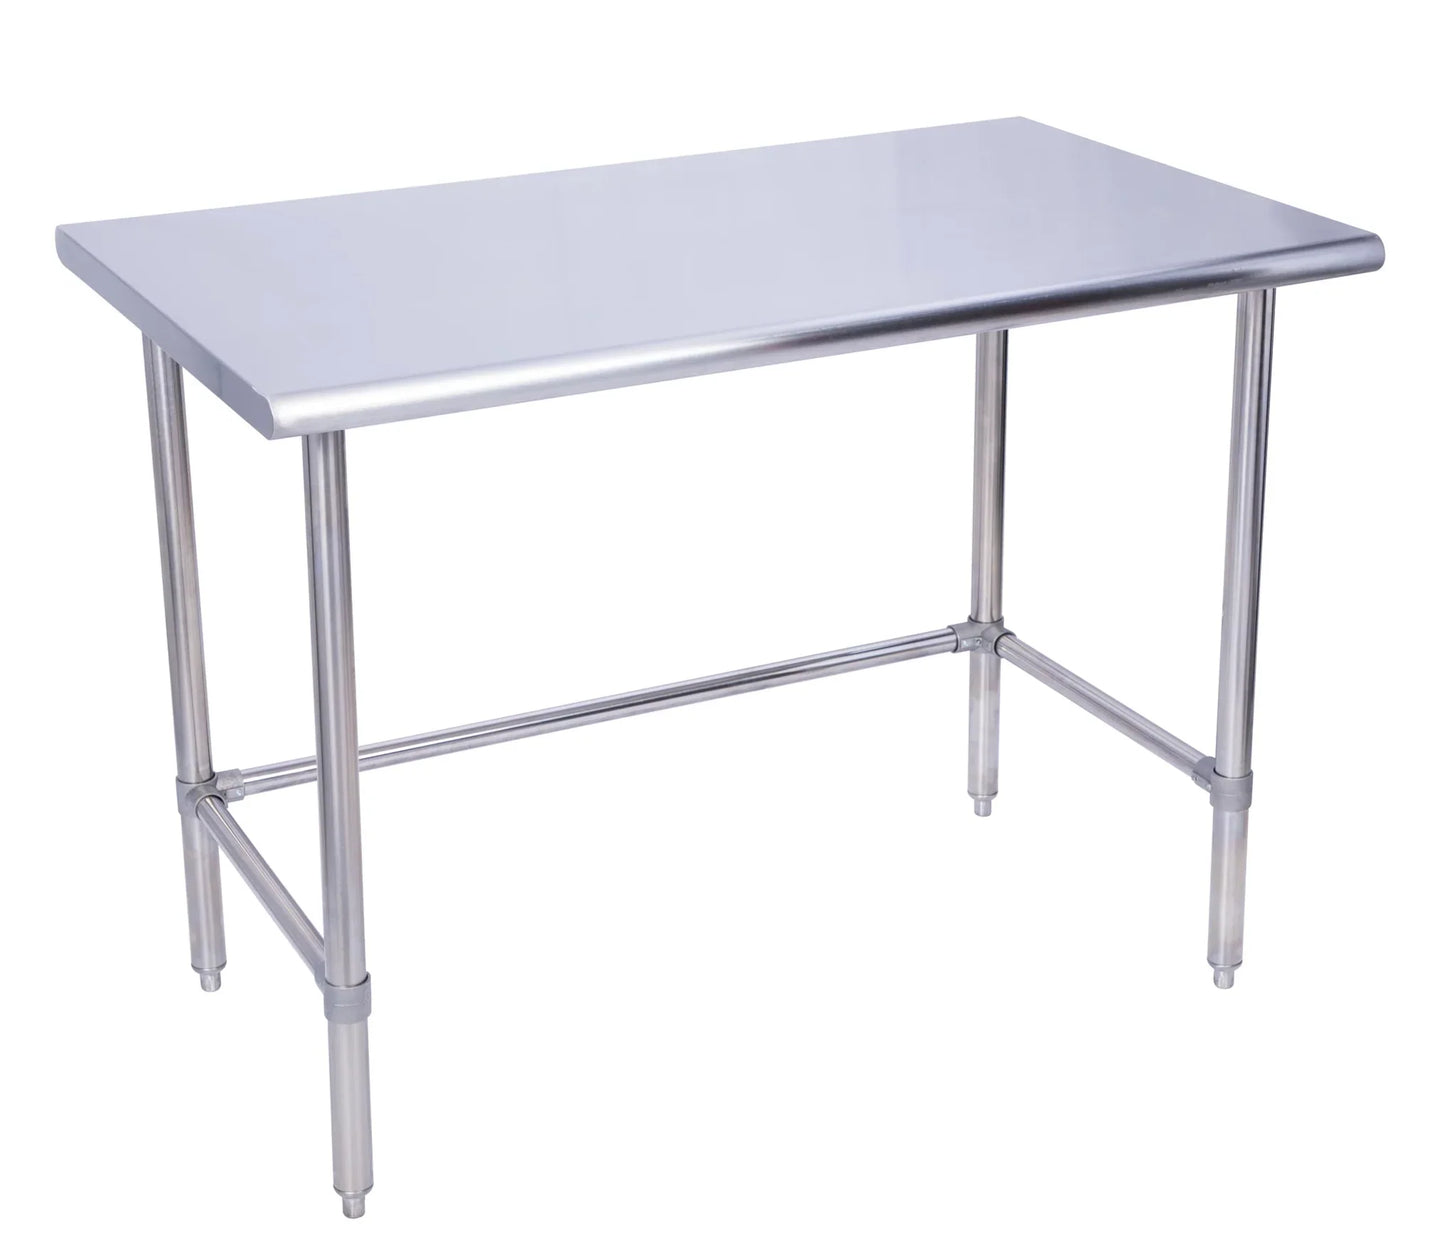 KCS WSCB-2436 24" x 36" Stainless Steel Work Table With Cross Bar